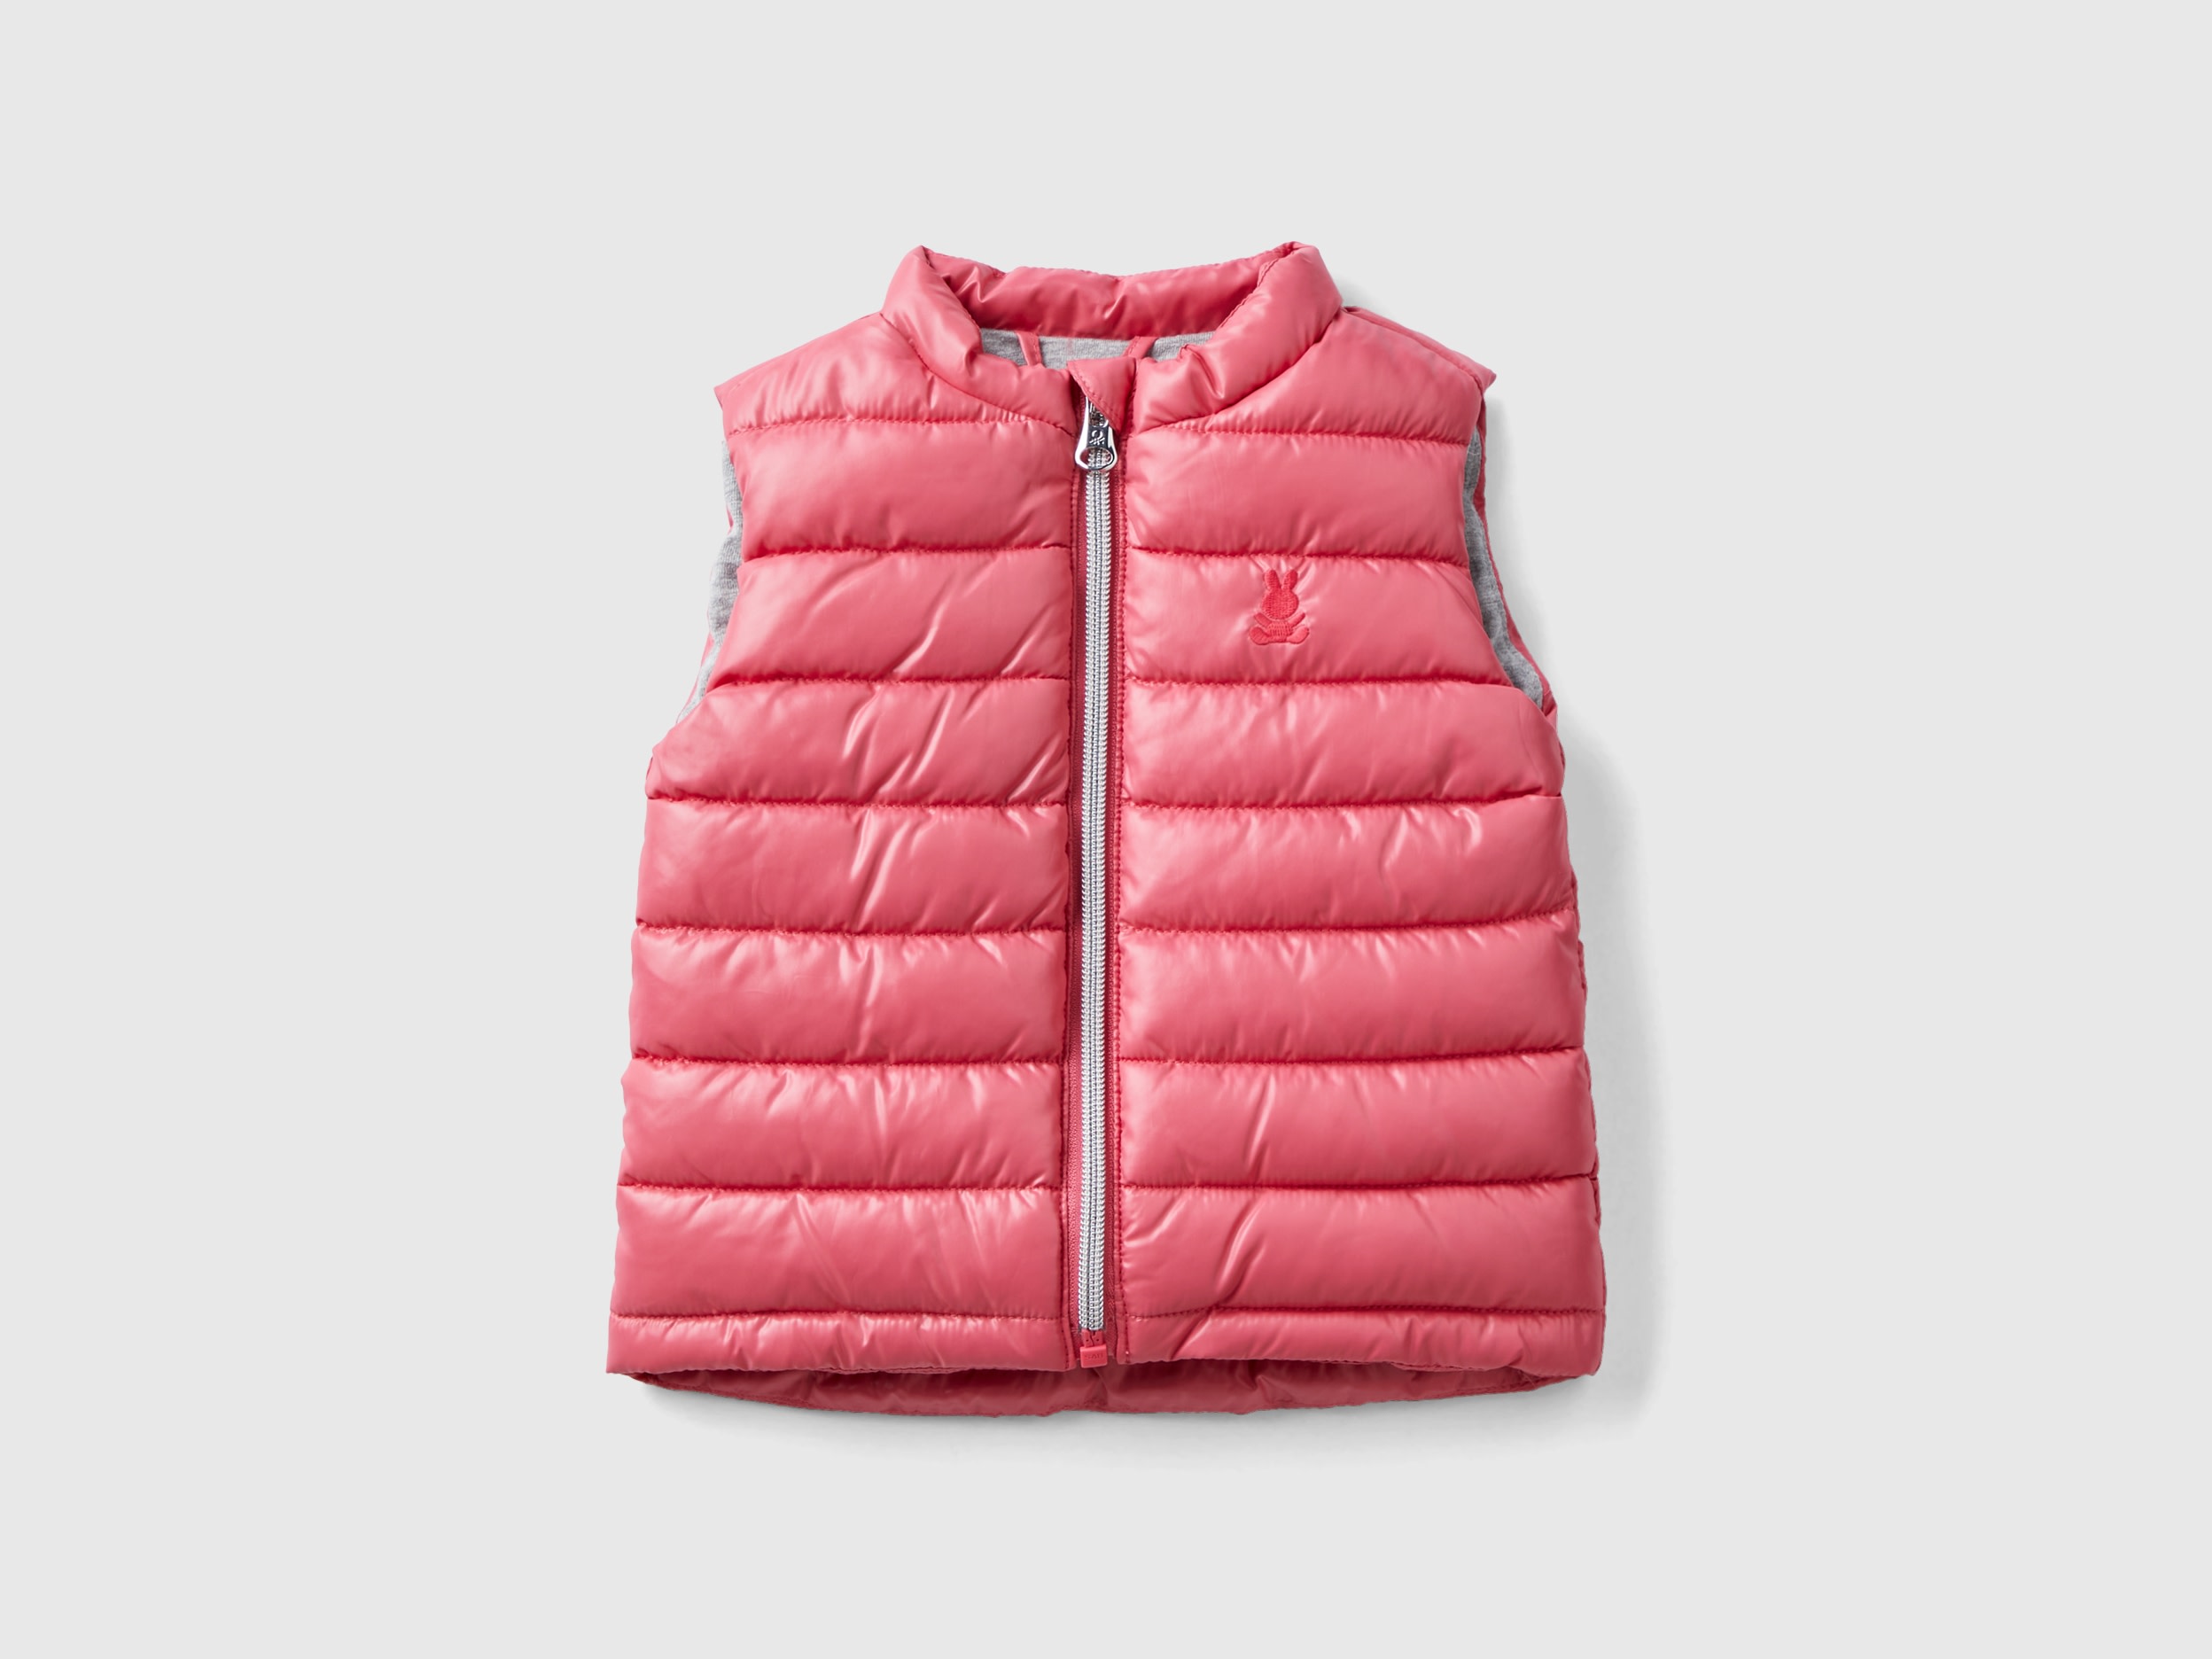 benetton, padded vest in technical fabric, size 12-18, salmon, kids